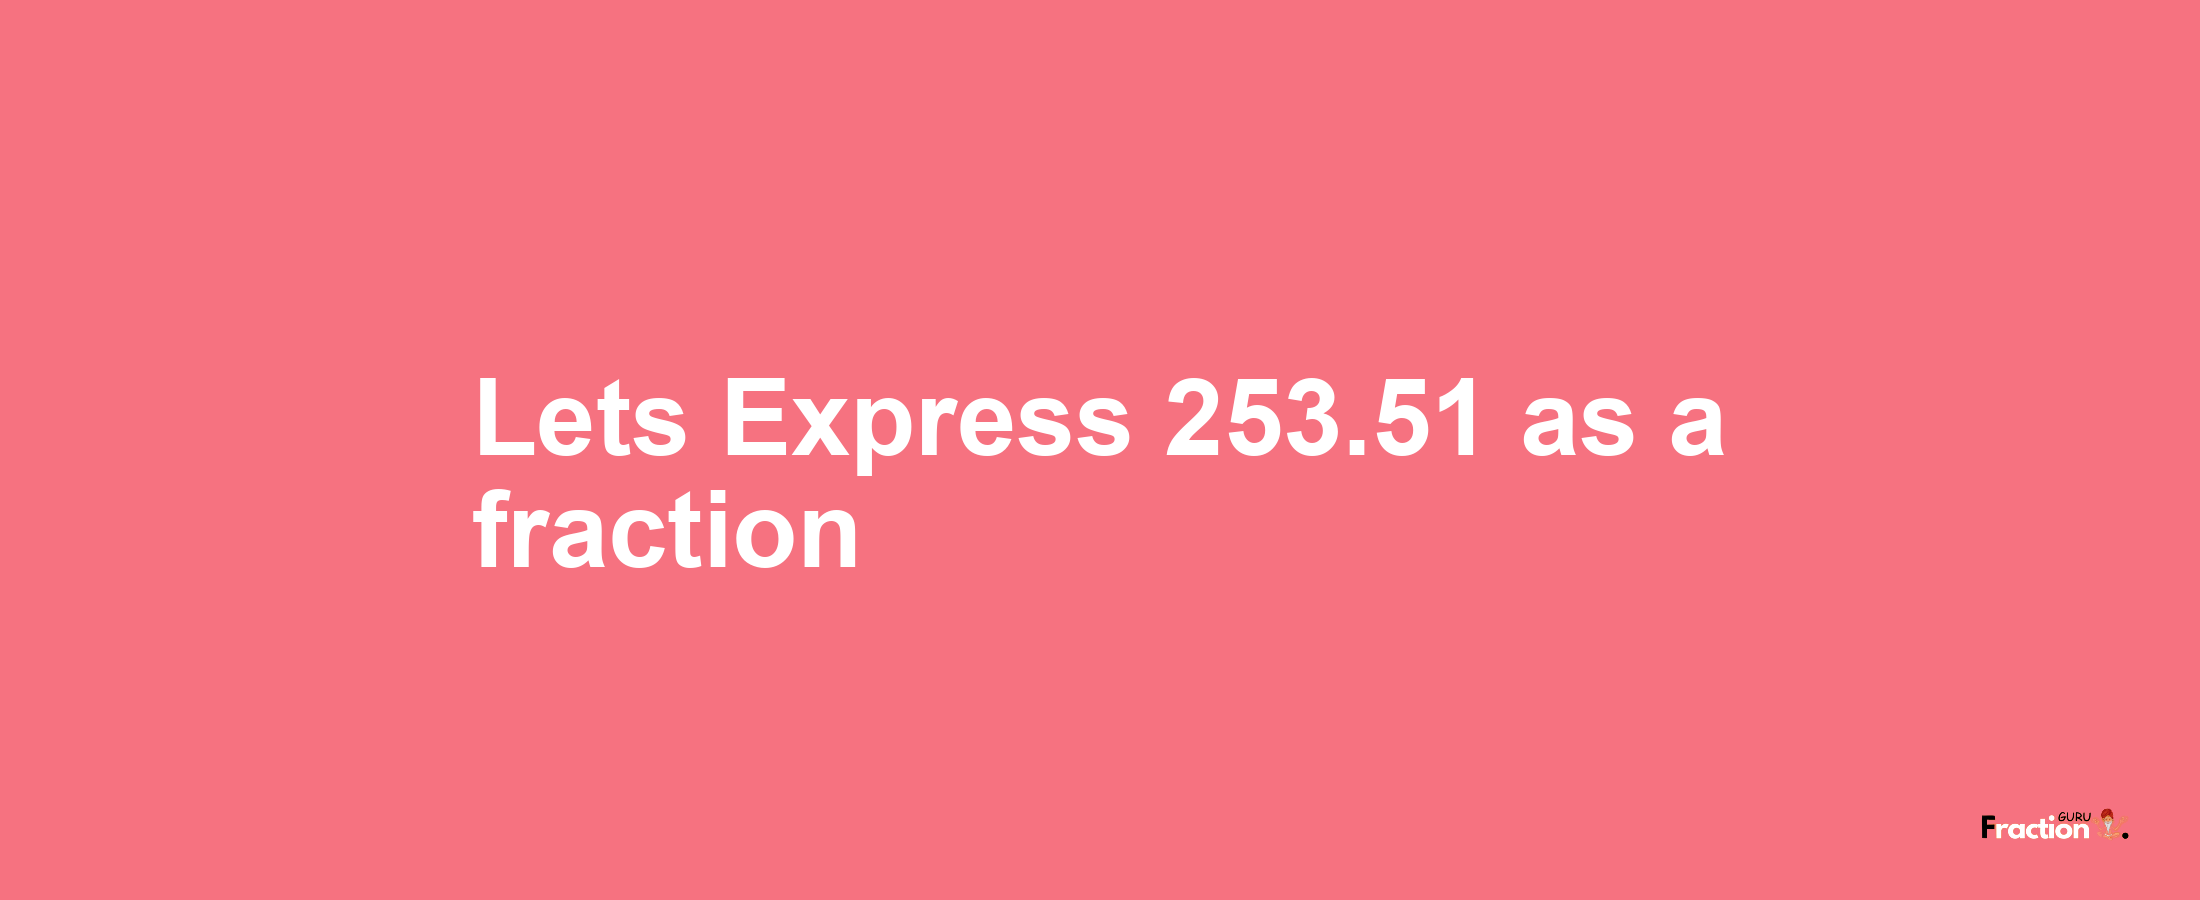 Lets Express 253.51 as afraction